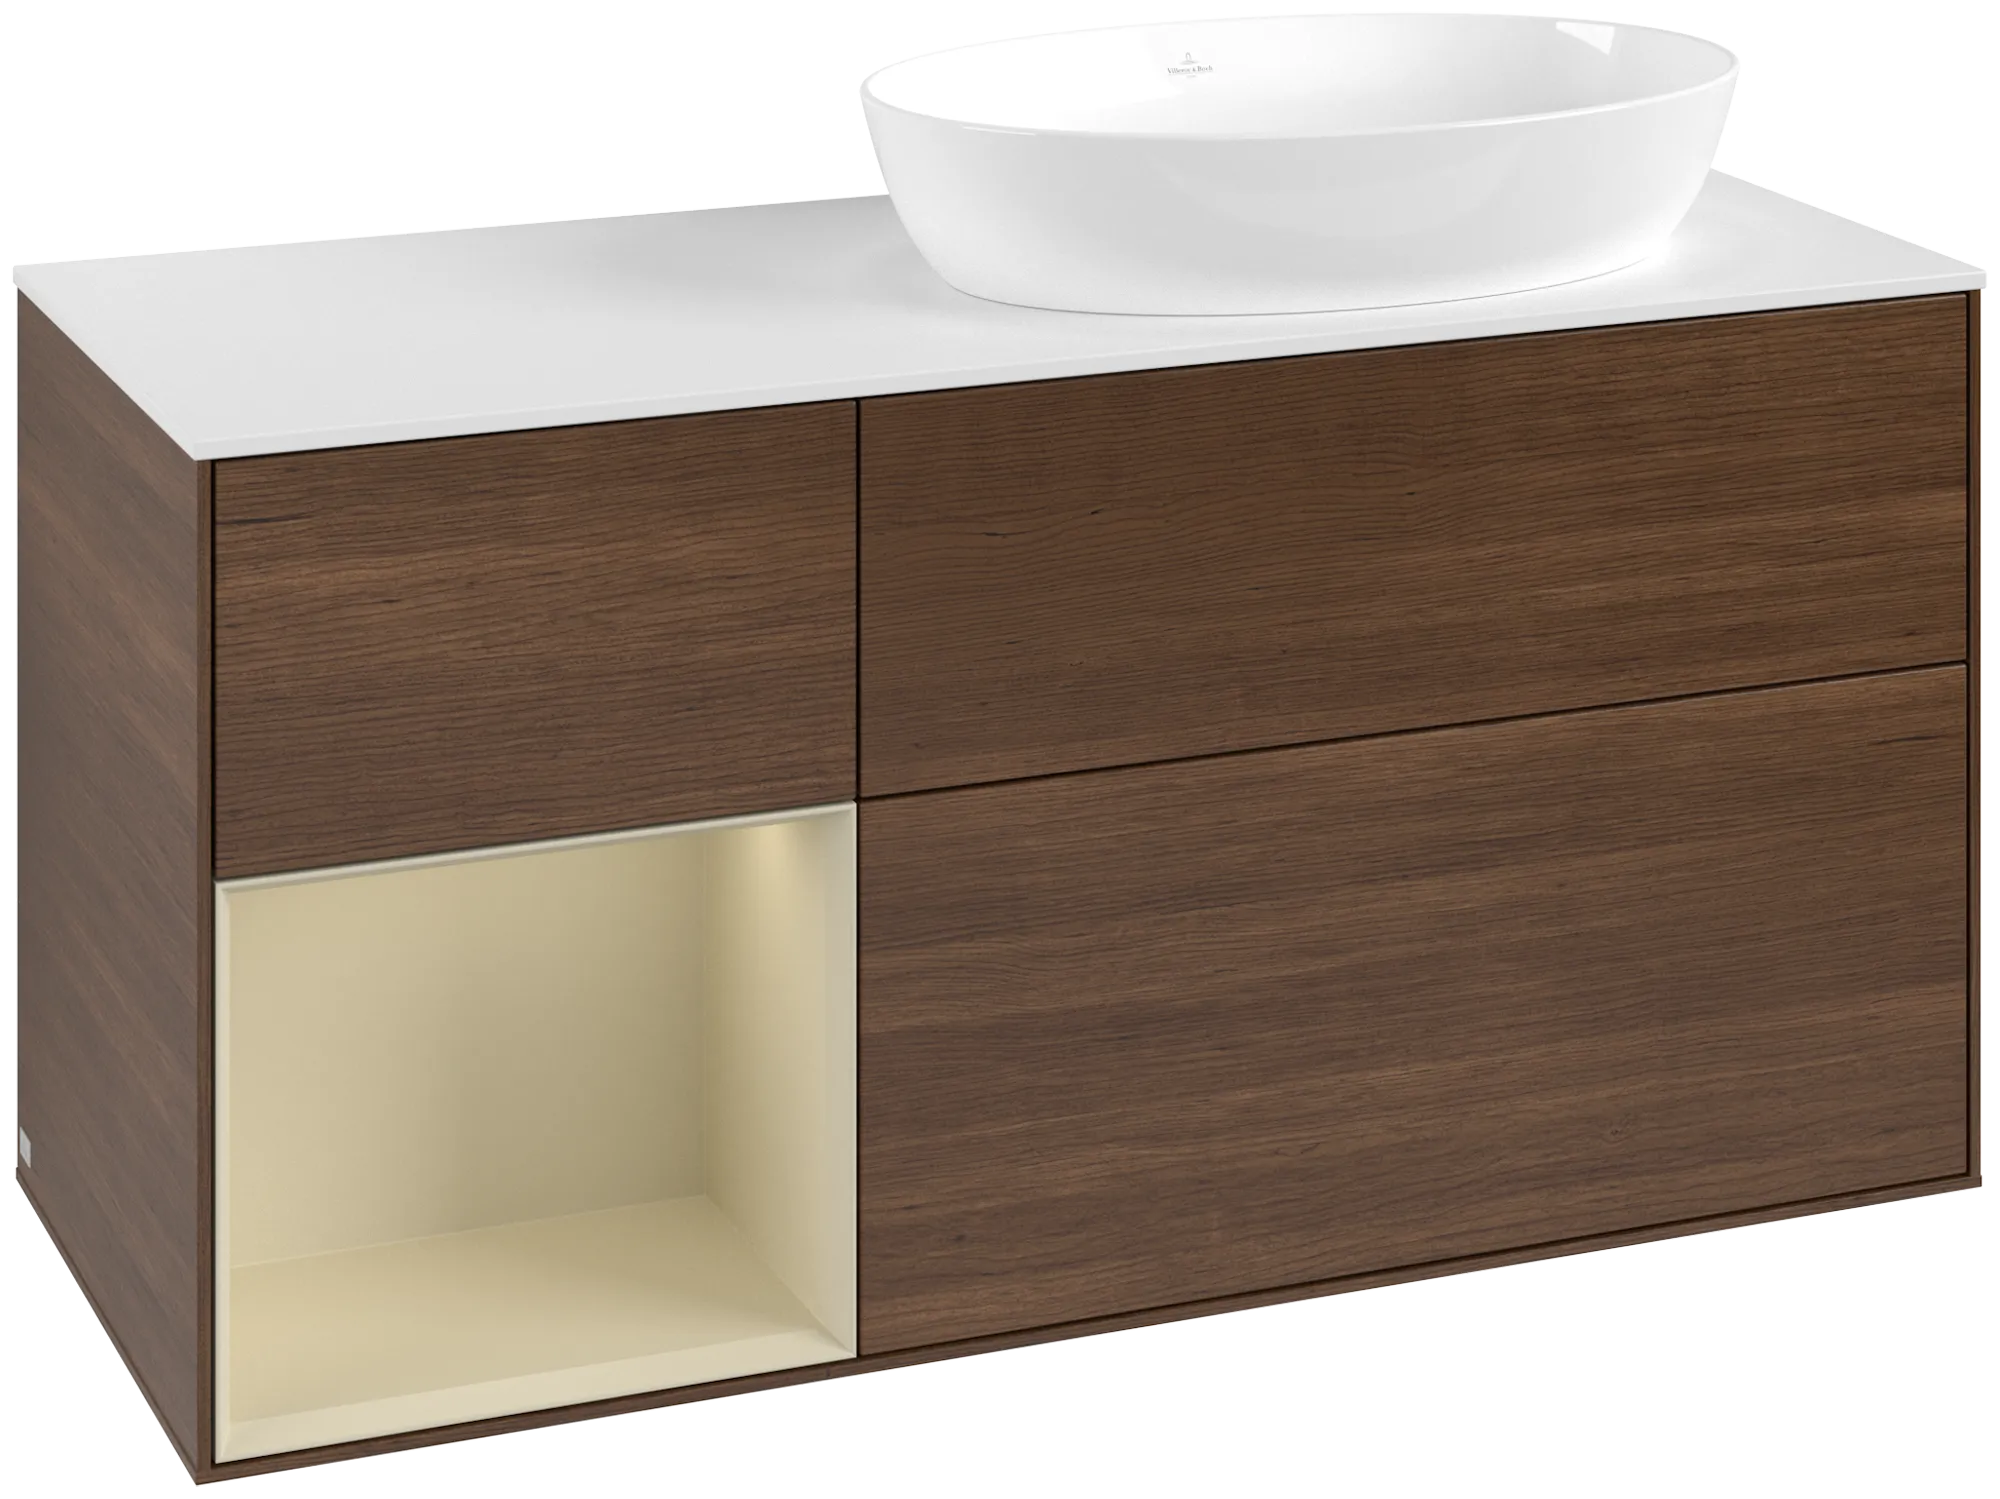 Picture of VILLEROY BOCH Finion Vanity unit, with lighting, 3 pull-out compartments, 1200 x 603 x 501 mm, Walnut Veneer / Silk Grey Matt Lacquer / Glass White Matt #GA41HJGN